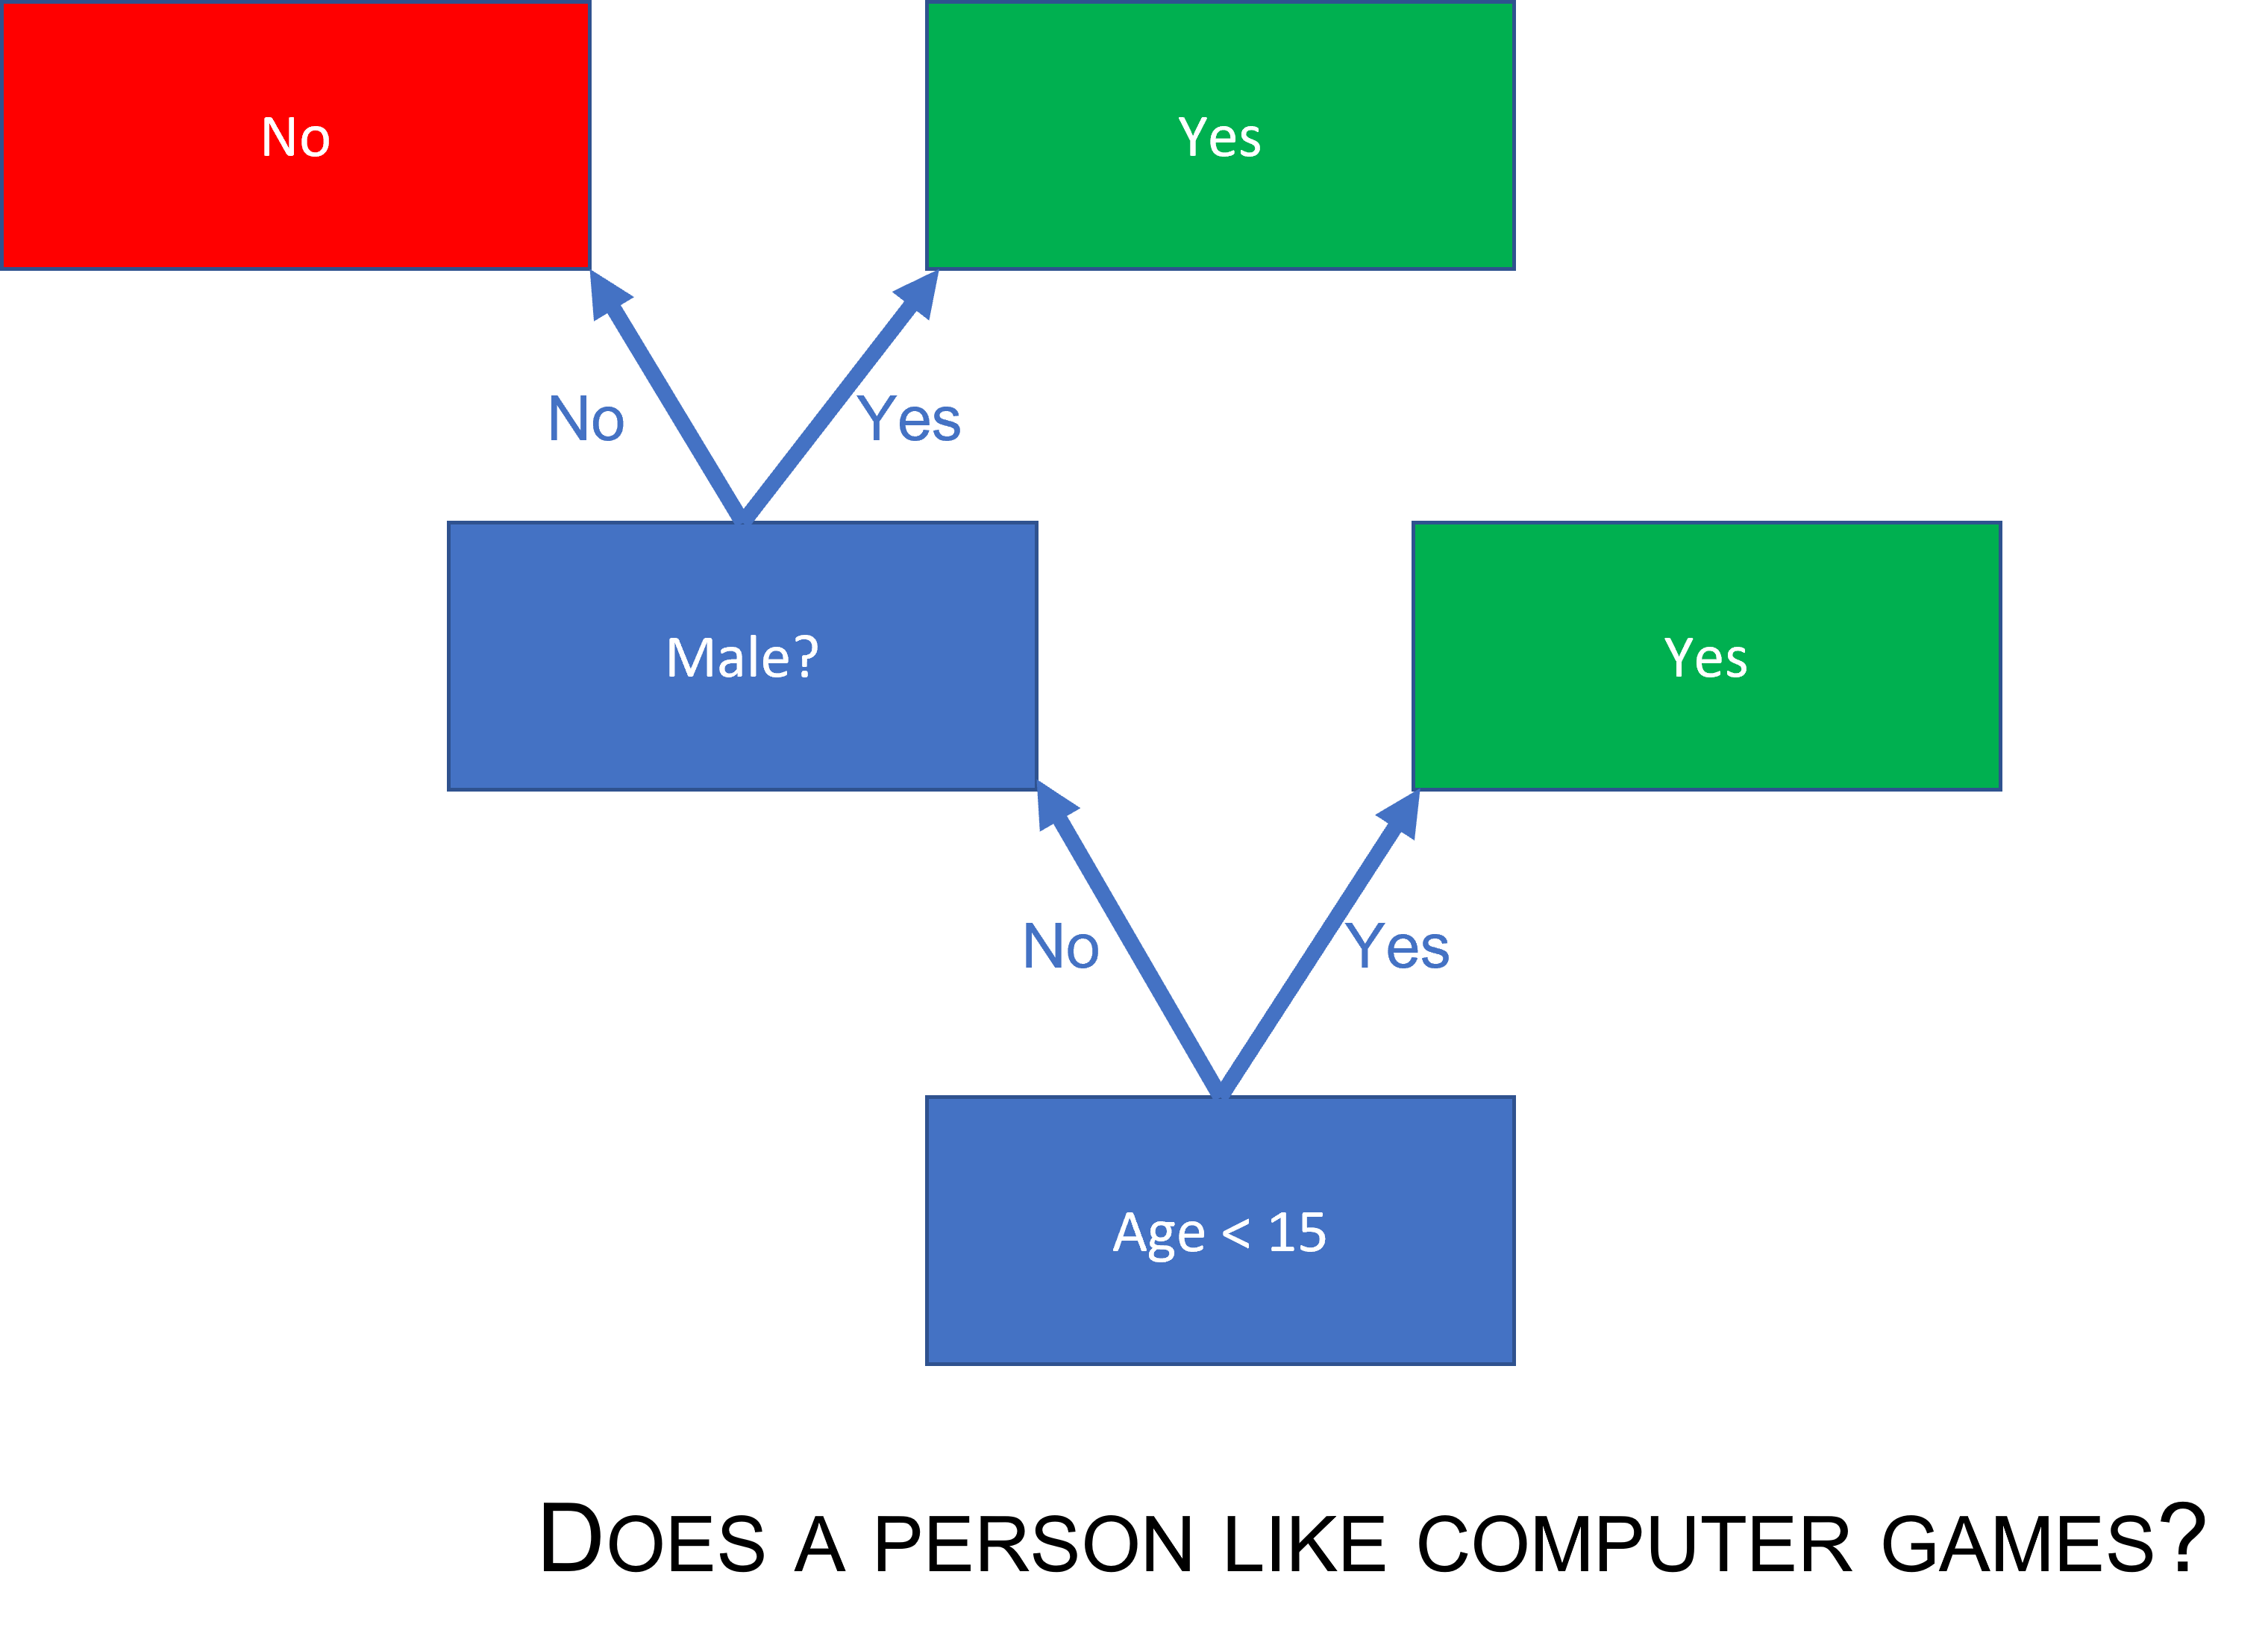 A simple decision tree